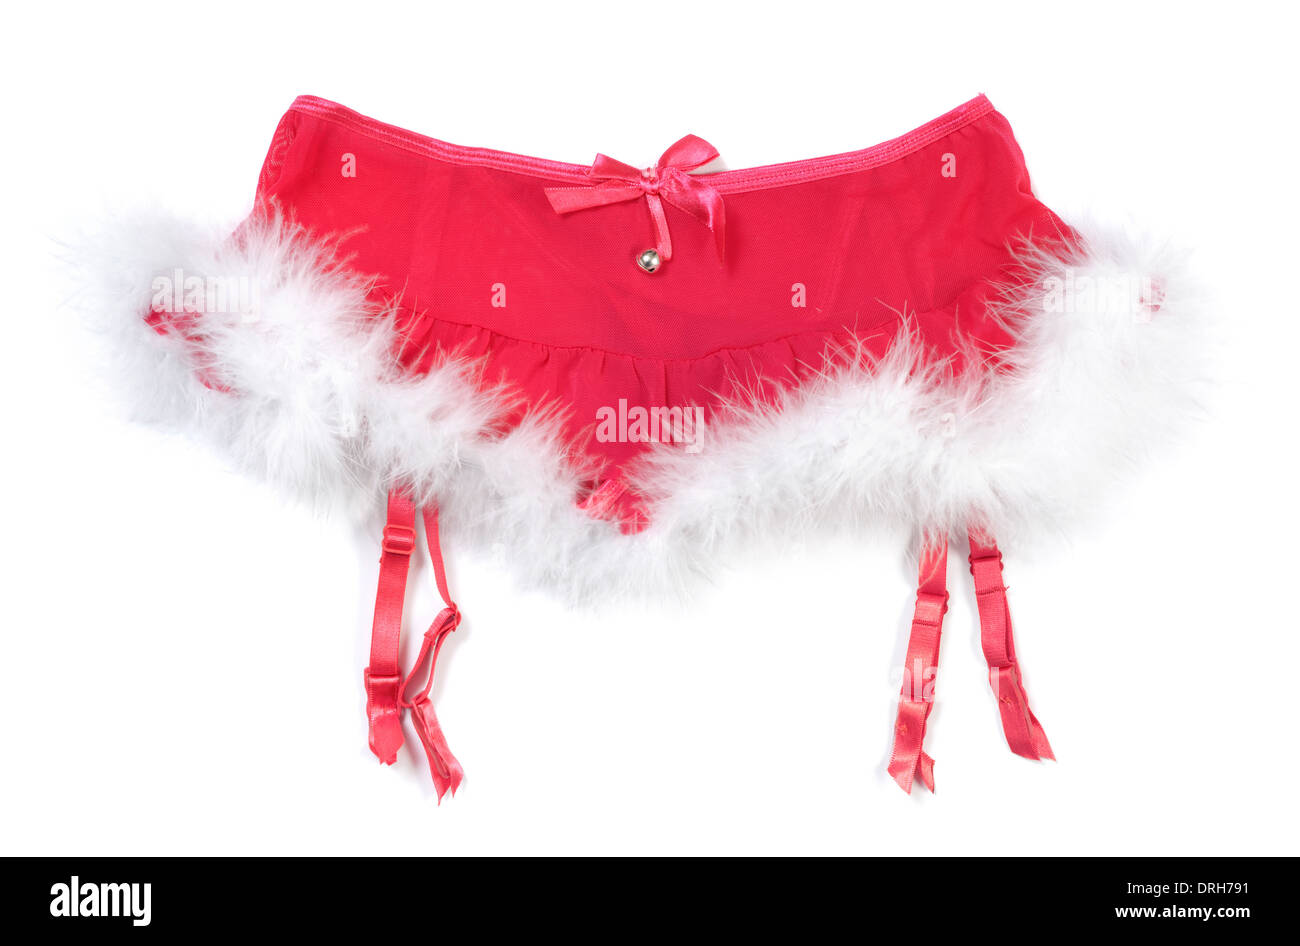 Red fluffy Christmas women skirt sexy romantic lingerie with white fur Isolated on white background Stock Photo